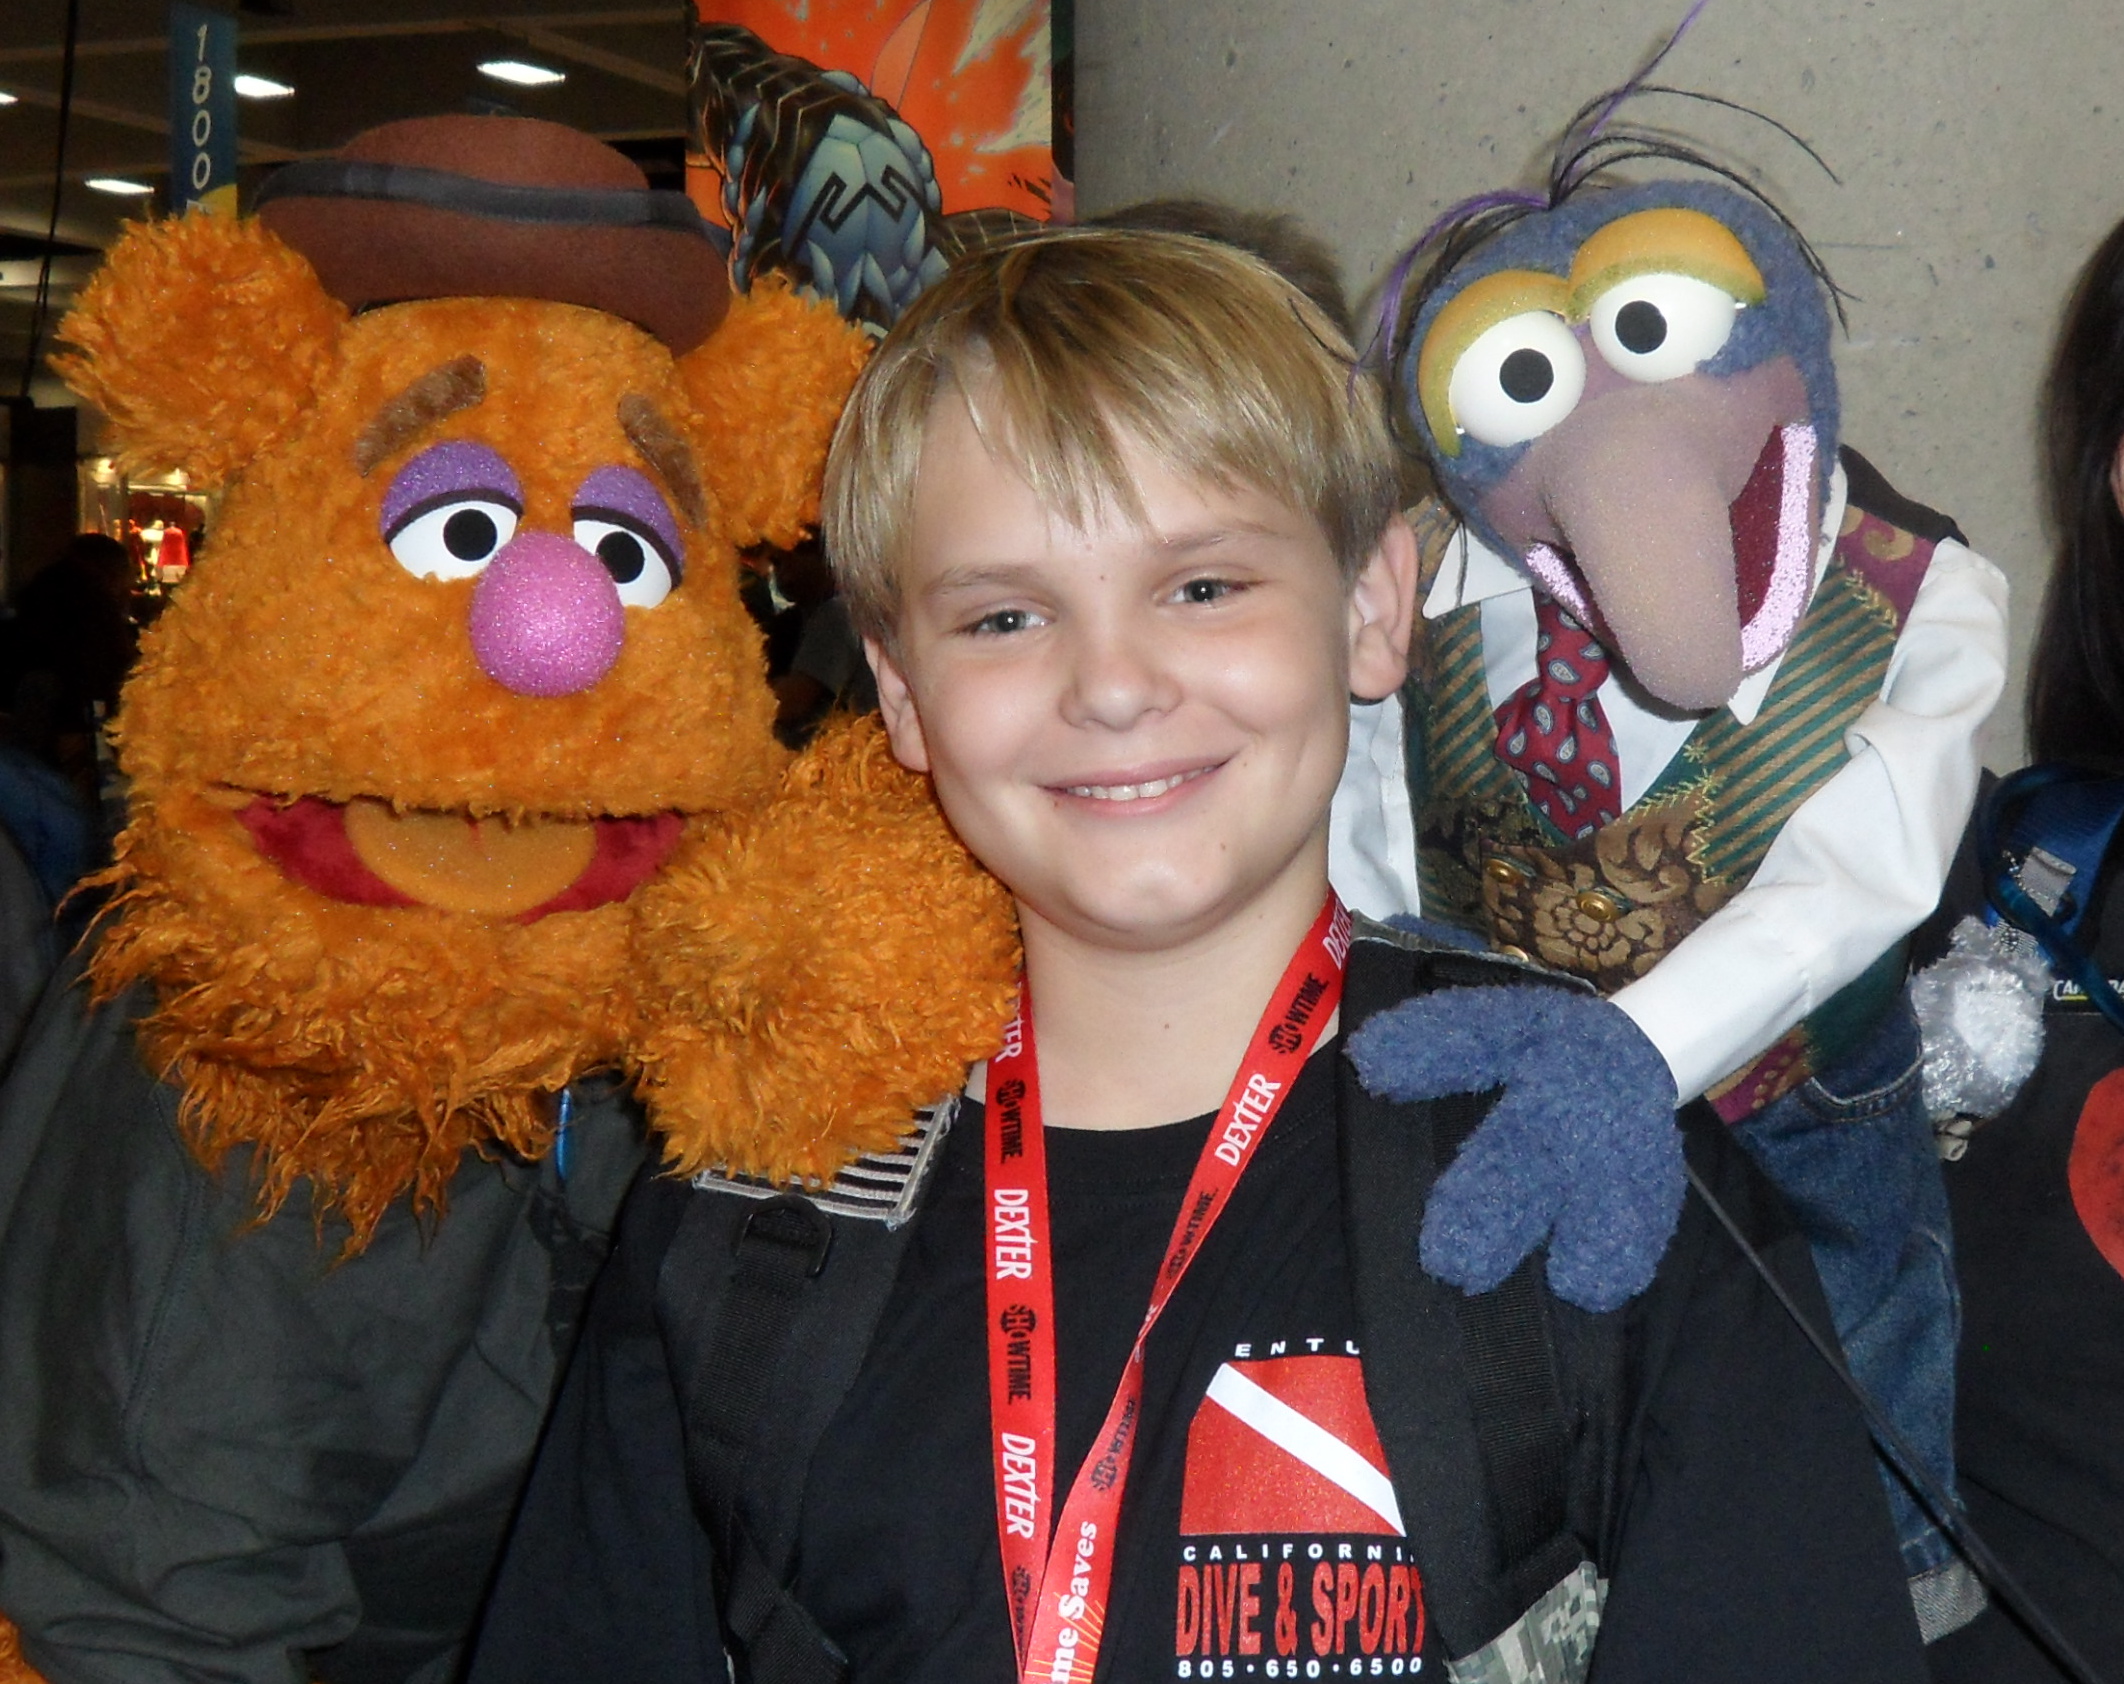 Reese Hartwig with Disney's The Muppets and Ken Jeong